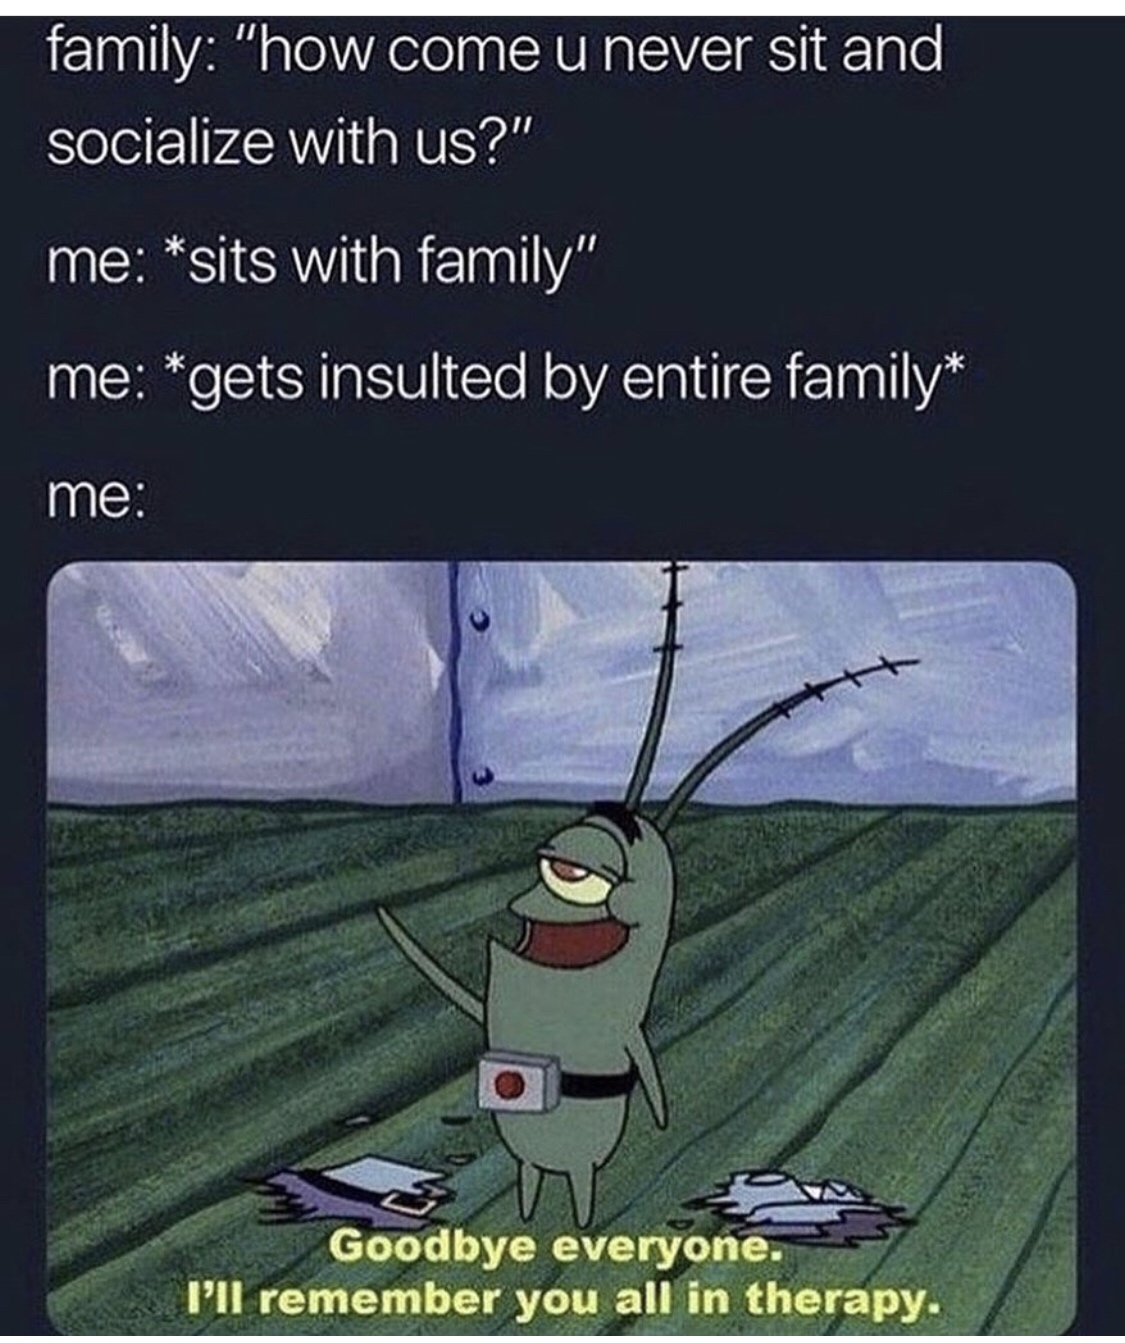 ll see you all in therapy meme - family "how come u never sit and socialize with us?" me sits with family" me gets insulted by entire family me Goodbye everyone. I'll remember you all in therapy.